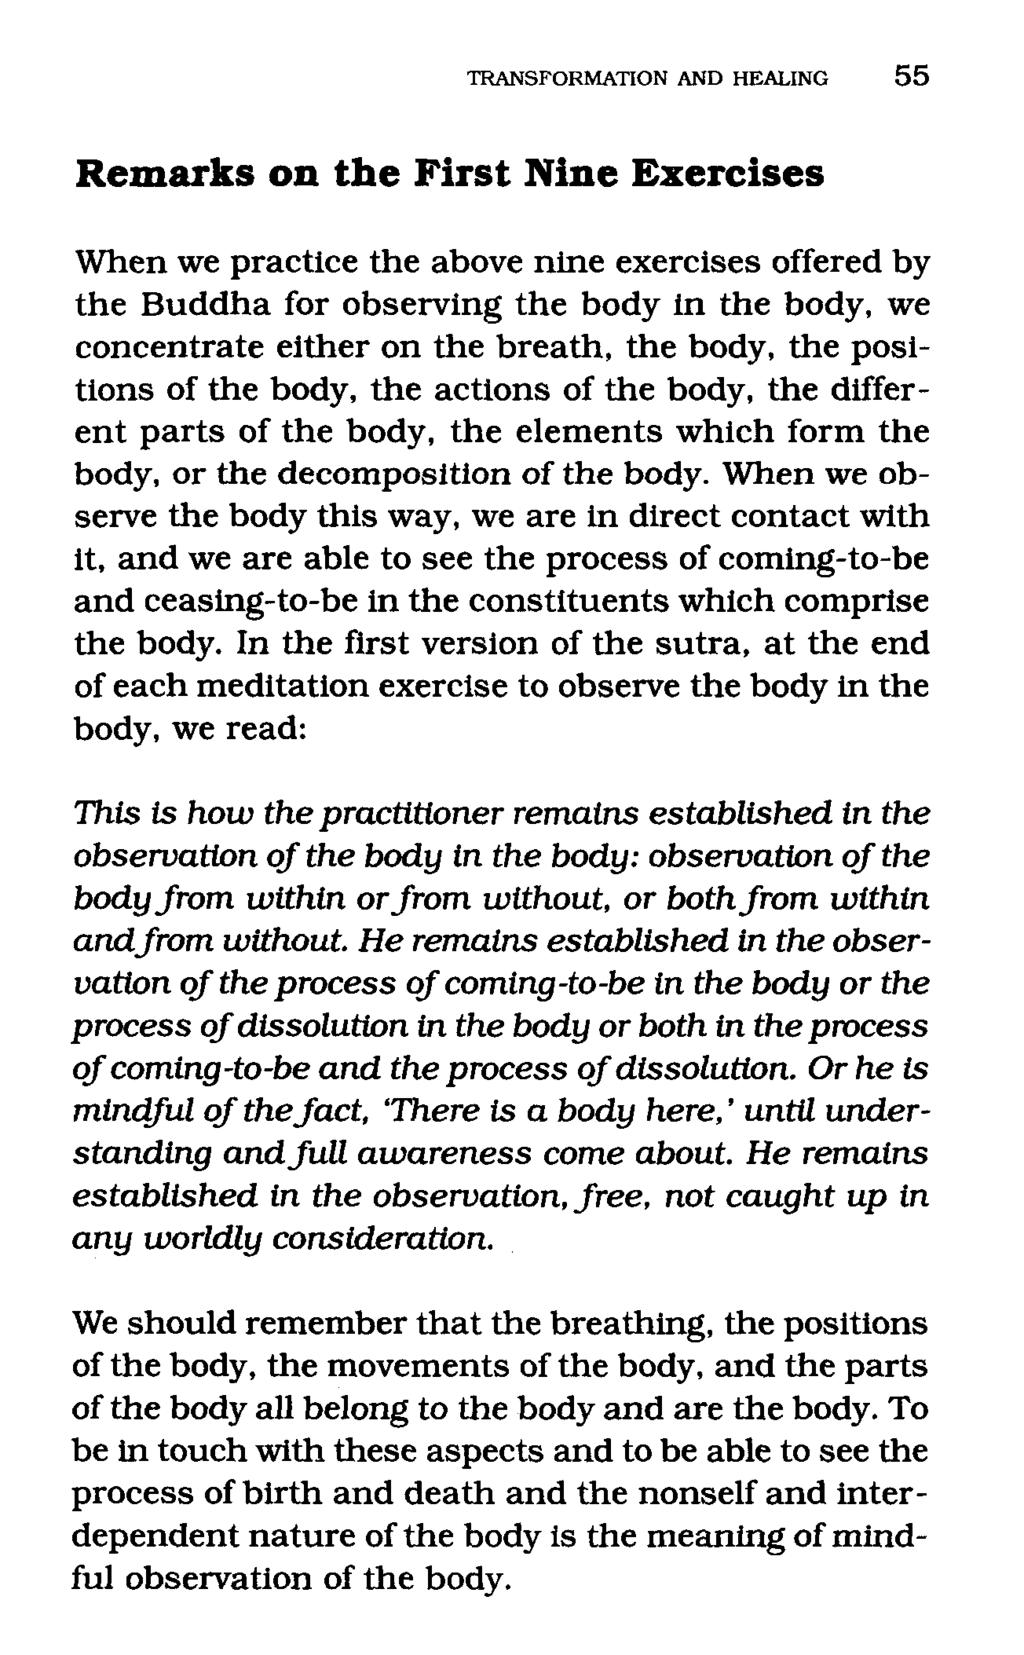 TRANSFORMATION AND HEALING 55 Remarks on the First Nine Exercises When we practice the above nine exercises offered by the Buddha for observing the body in the body, we concentrate either on the